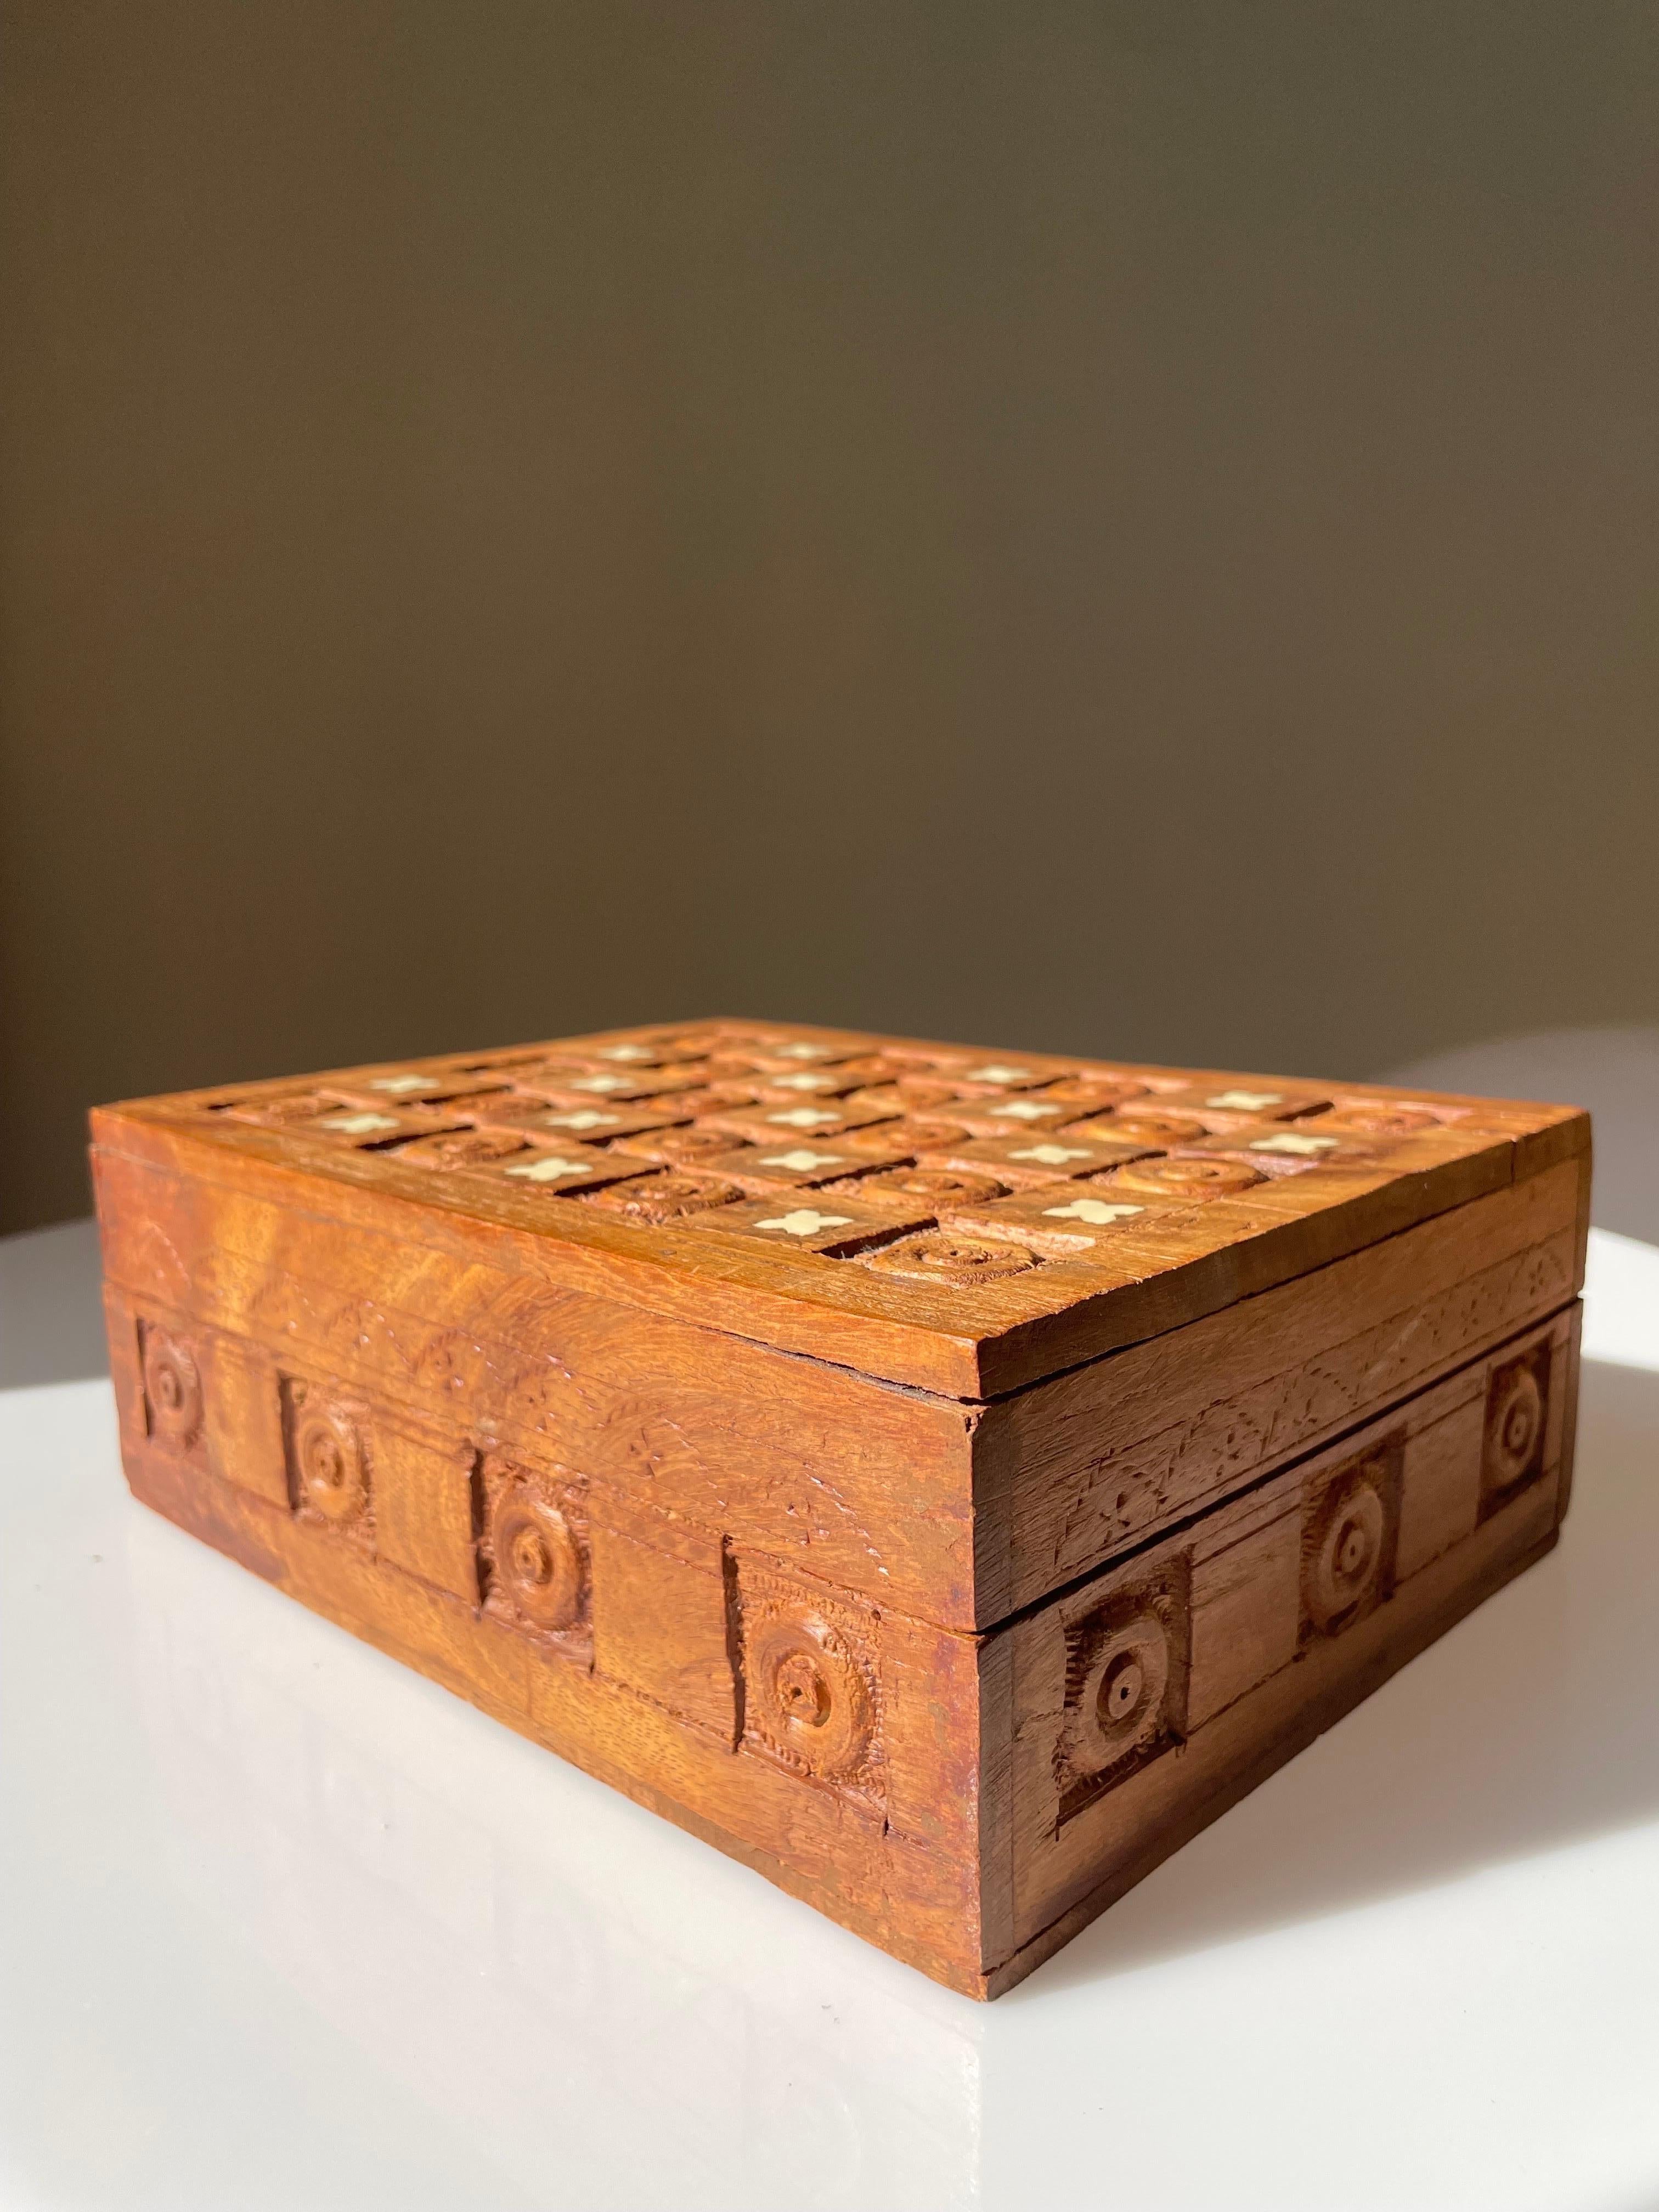 Handcarved wooden trinket box with carved geometric shapes, small handmade ornamental indentations and cream white decor on the lid. Rustic organic style. Beautiful vintage condition. 
India, circa 1970s. 